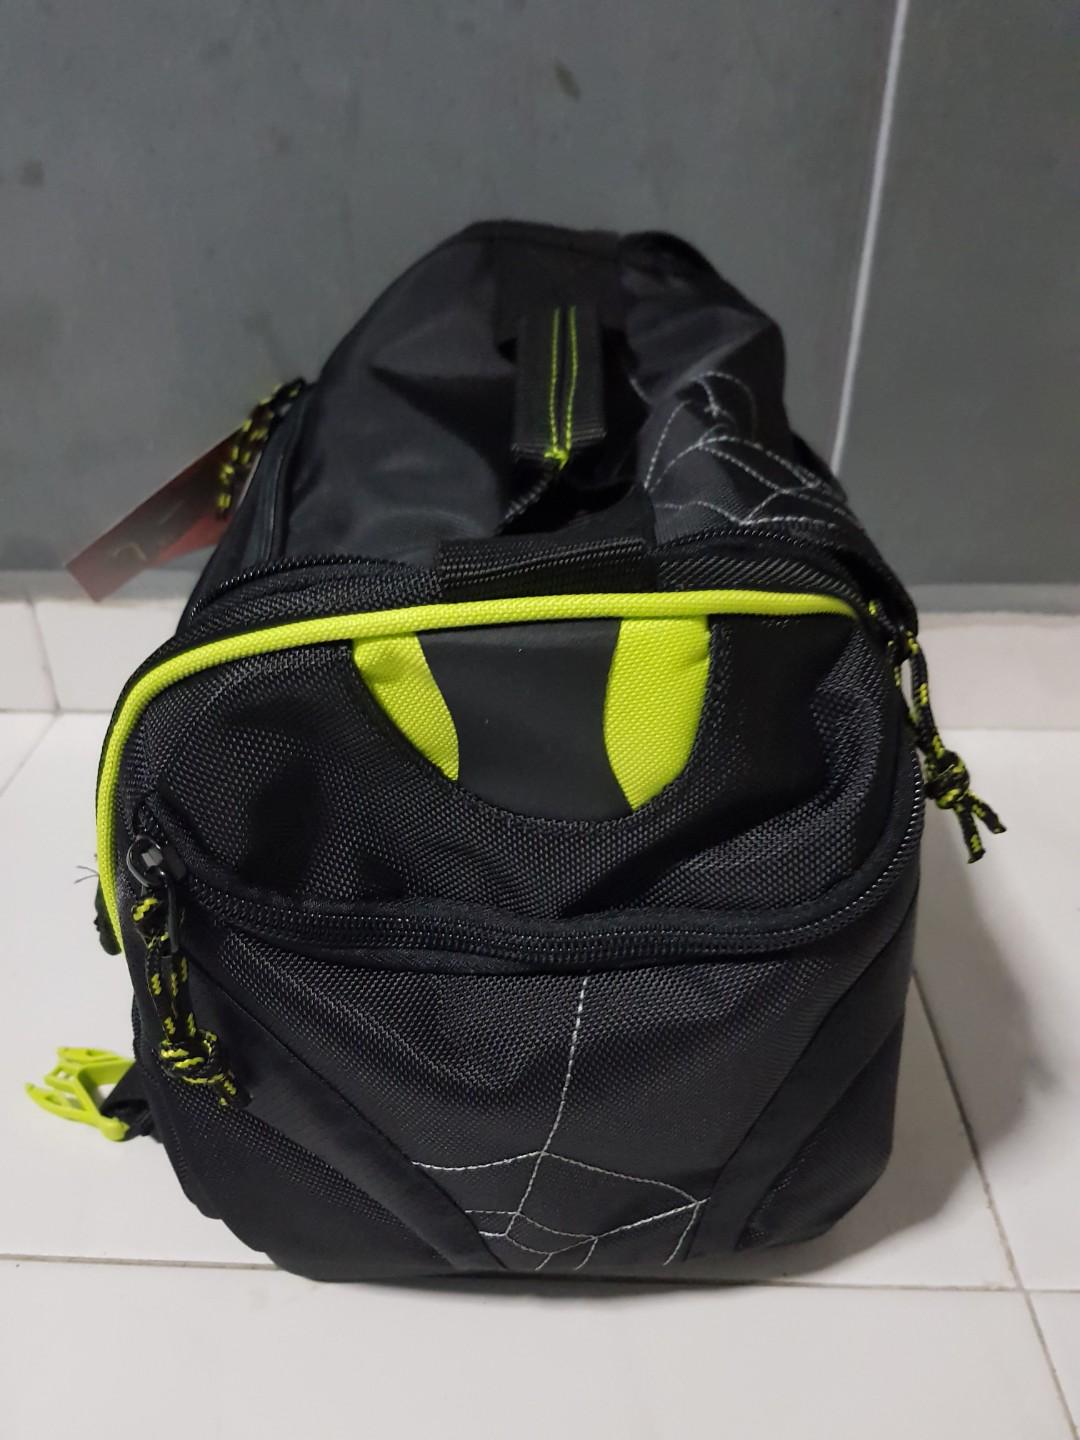 Spiderwire fishing tackle bag 15.7L, Sports Equipment, Fishing on Carousell